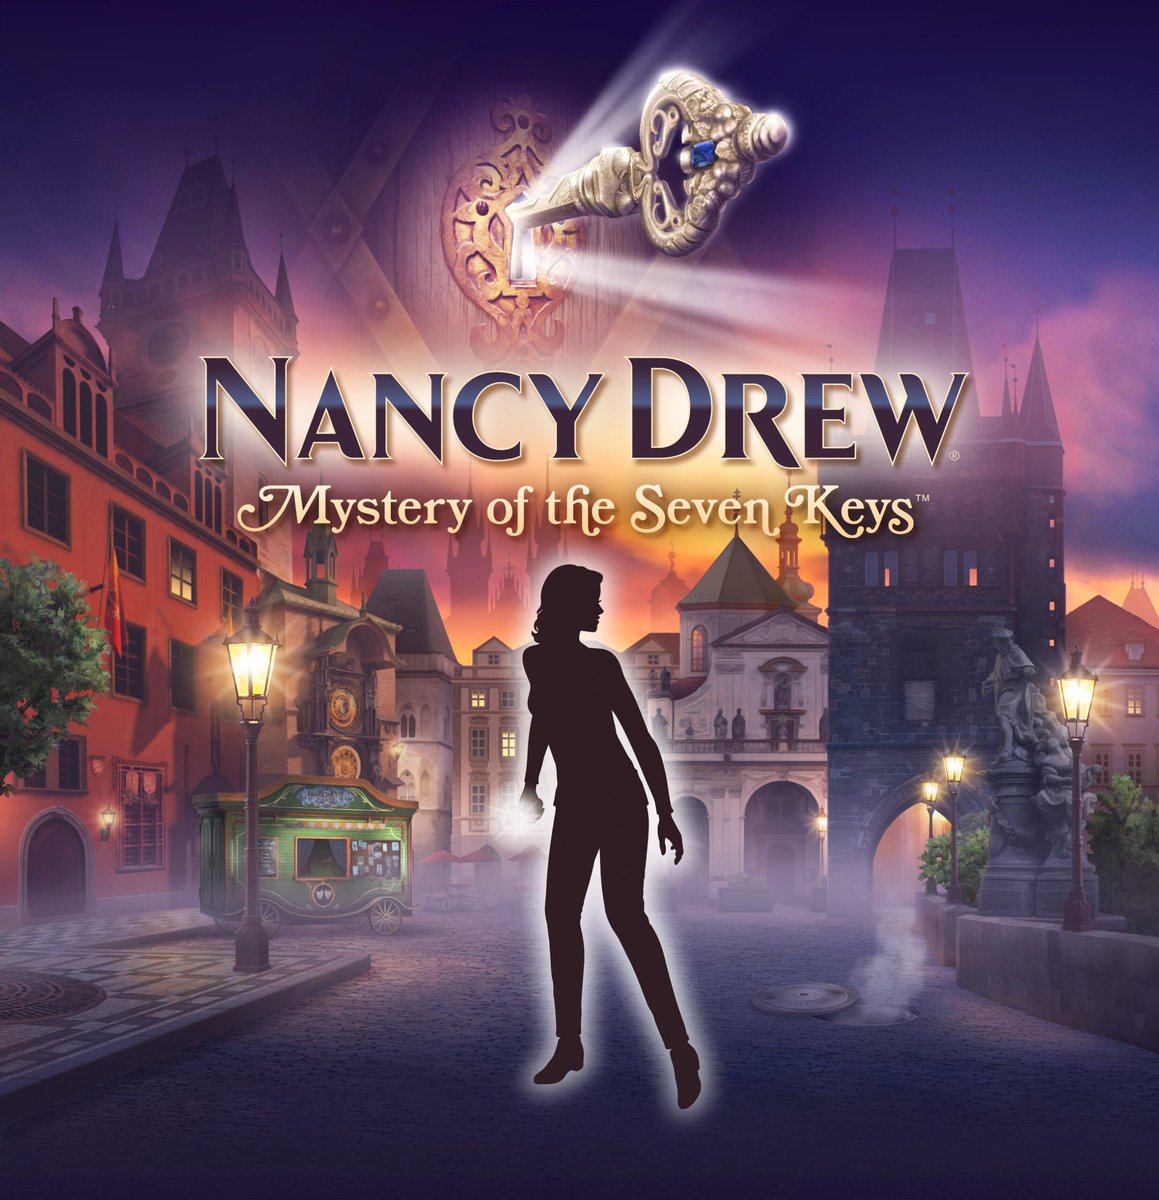 Another day, another mystery! I’m back as the voice of Nancy Drew in @HerInteractive newest game, Mystery of the Seven Keys 🗝🗝

This cast is incredible! The twists in this game will def keep you on your toes! Also the music is AMAZING @ryguy_can_fly 😘